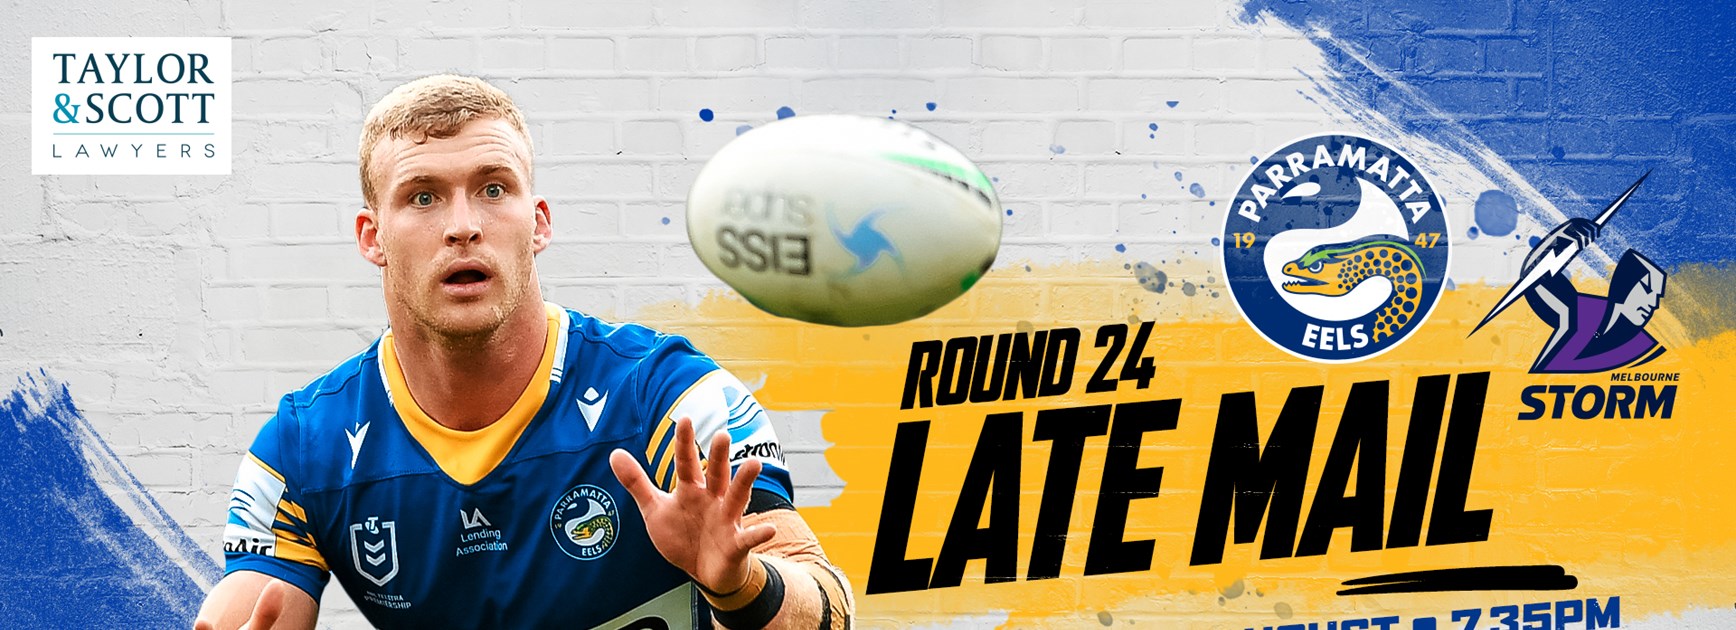 Late Mail - Storm v Eels, Round 24